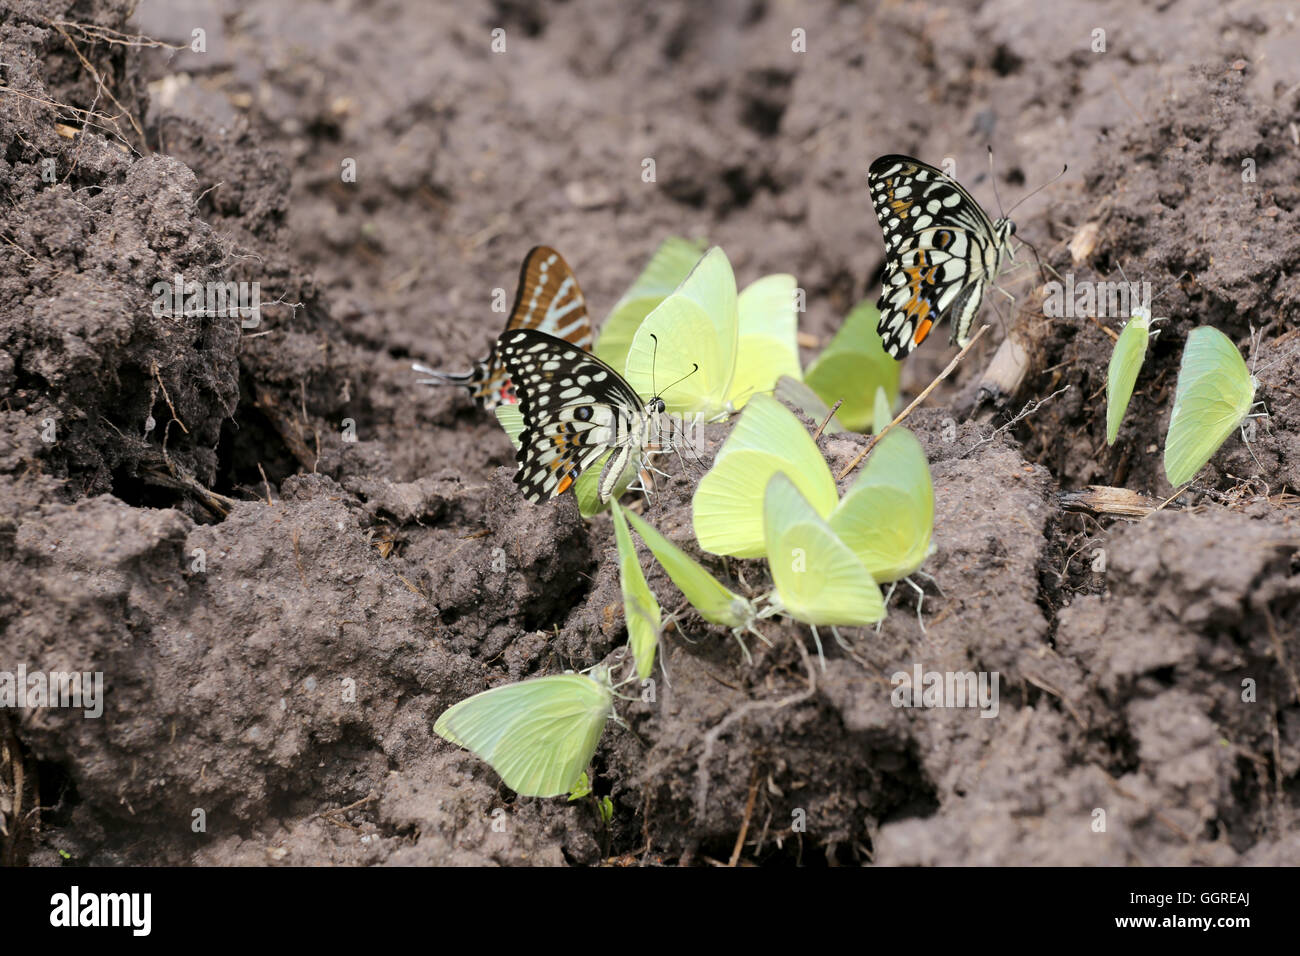 Yellow butterflies eating minerals on the ground in agricultural areas. Stock Photo